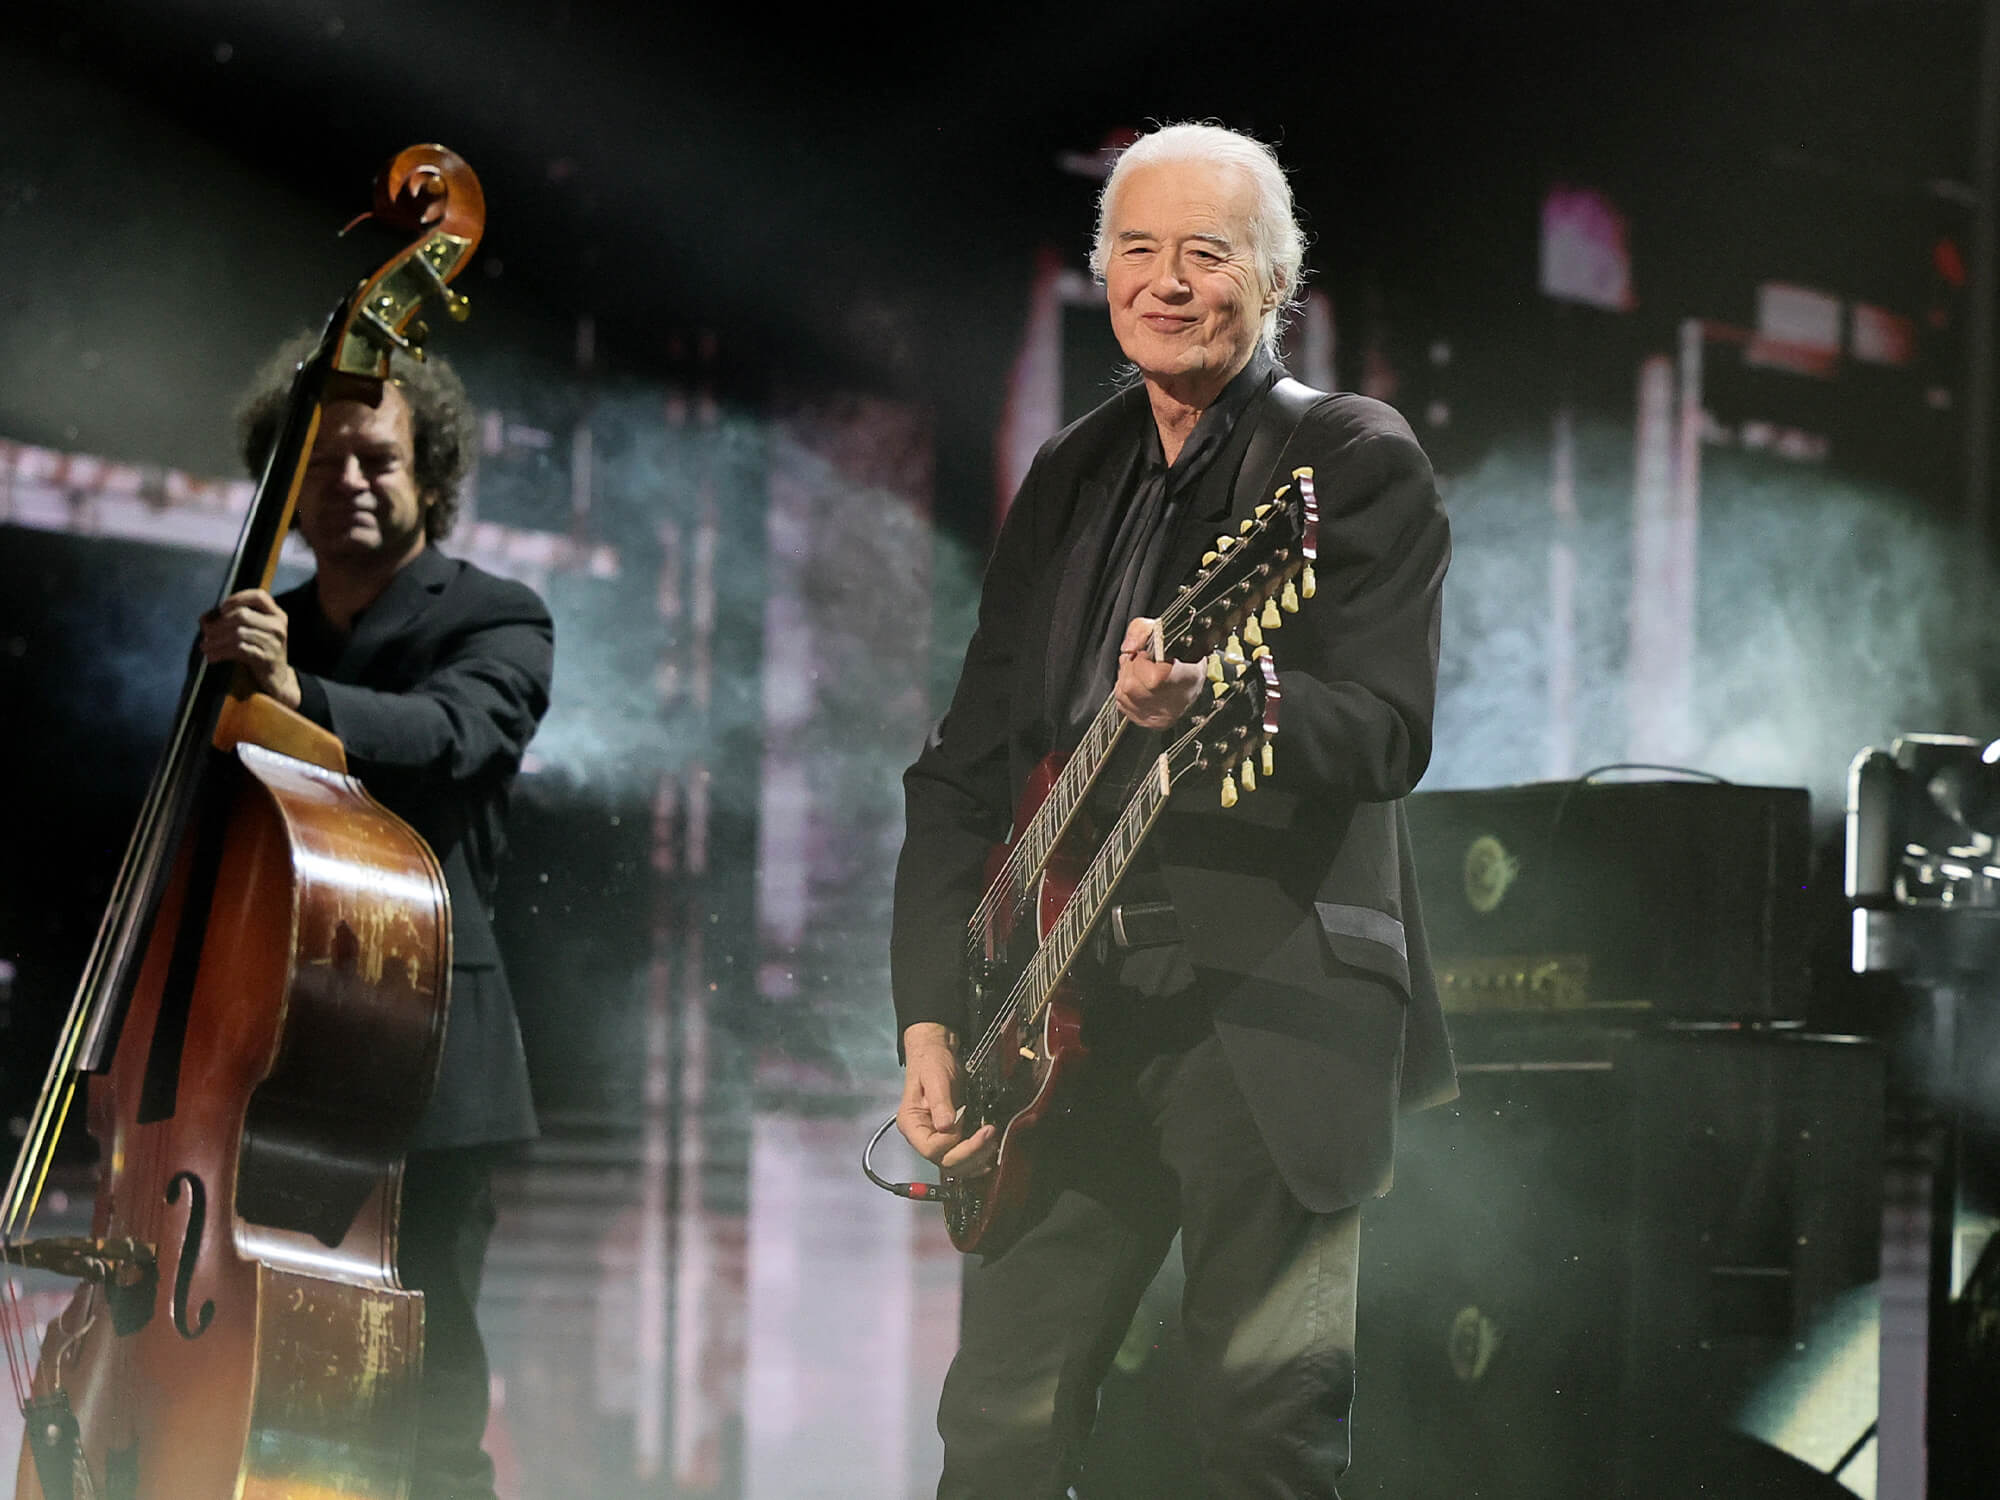 Jimmy Page smiling on stage at the Rock Hall induction performance. He is holding his double neck guitar.